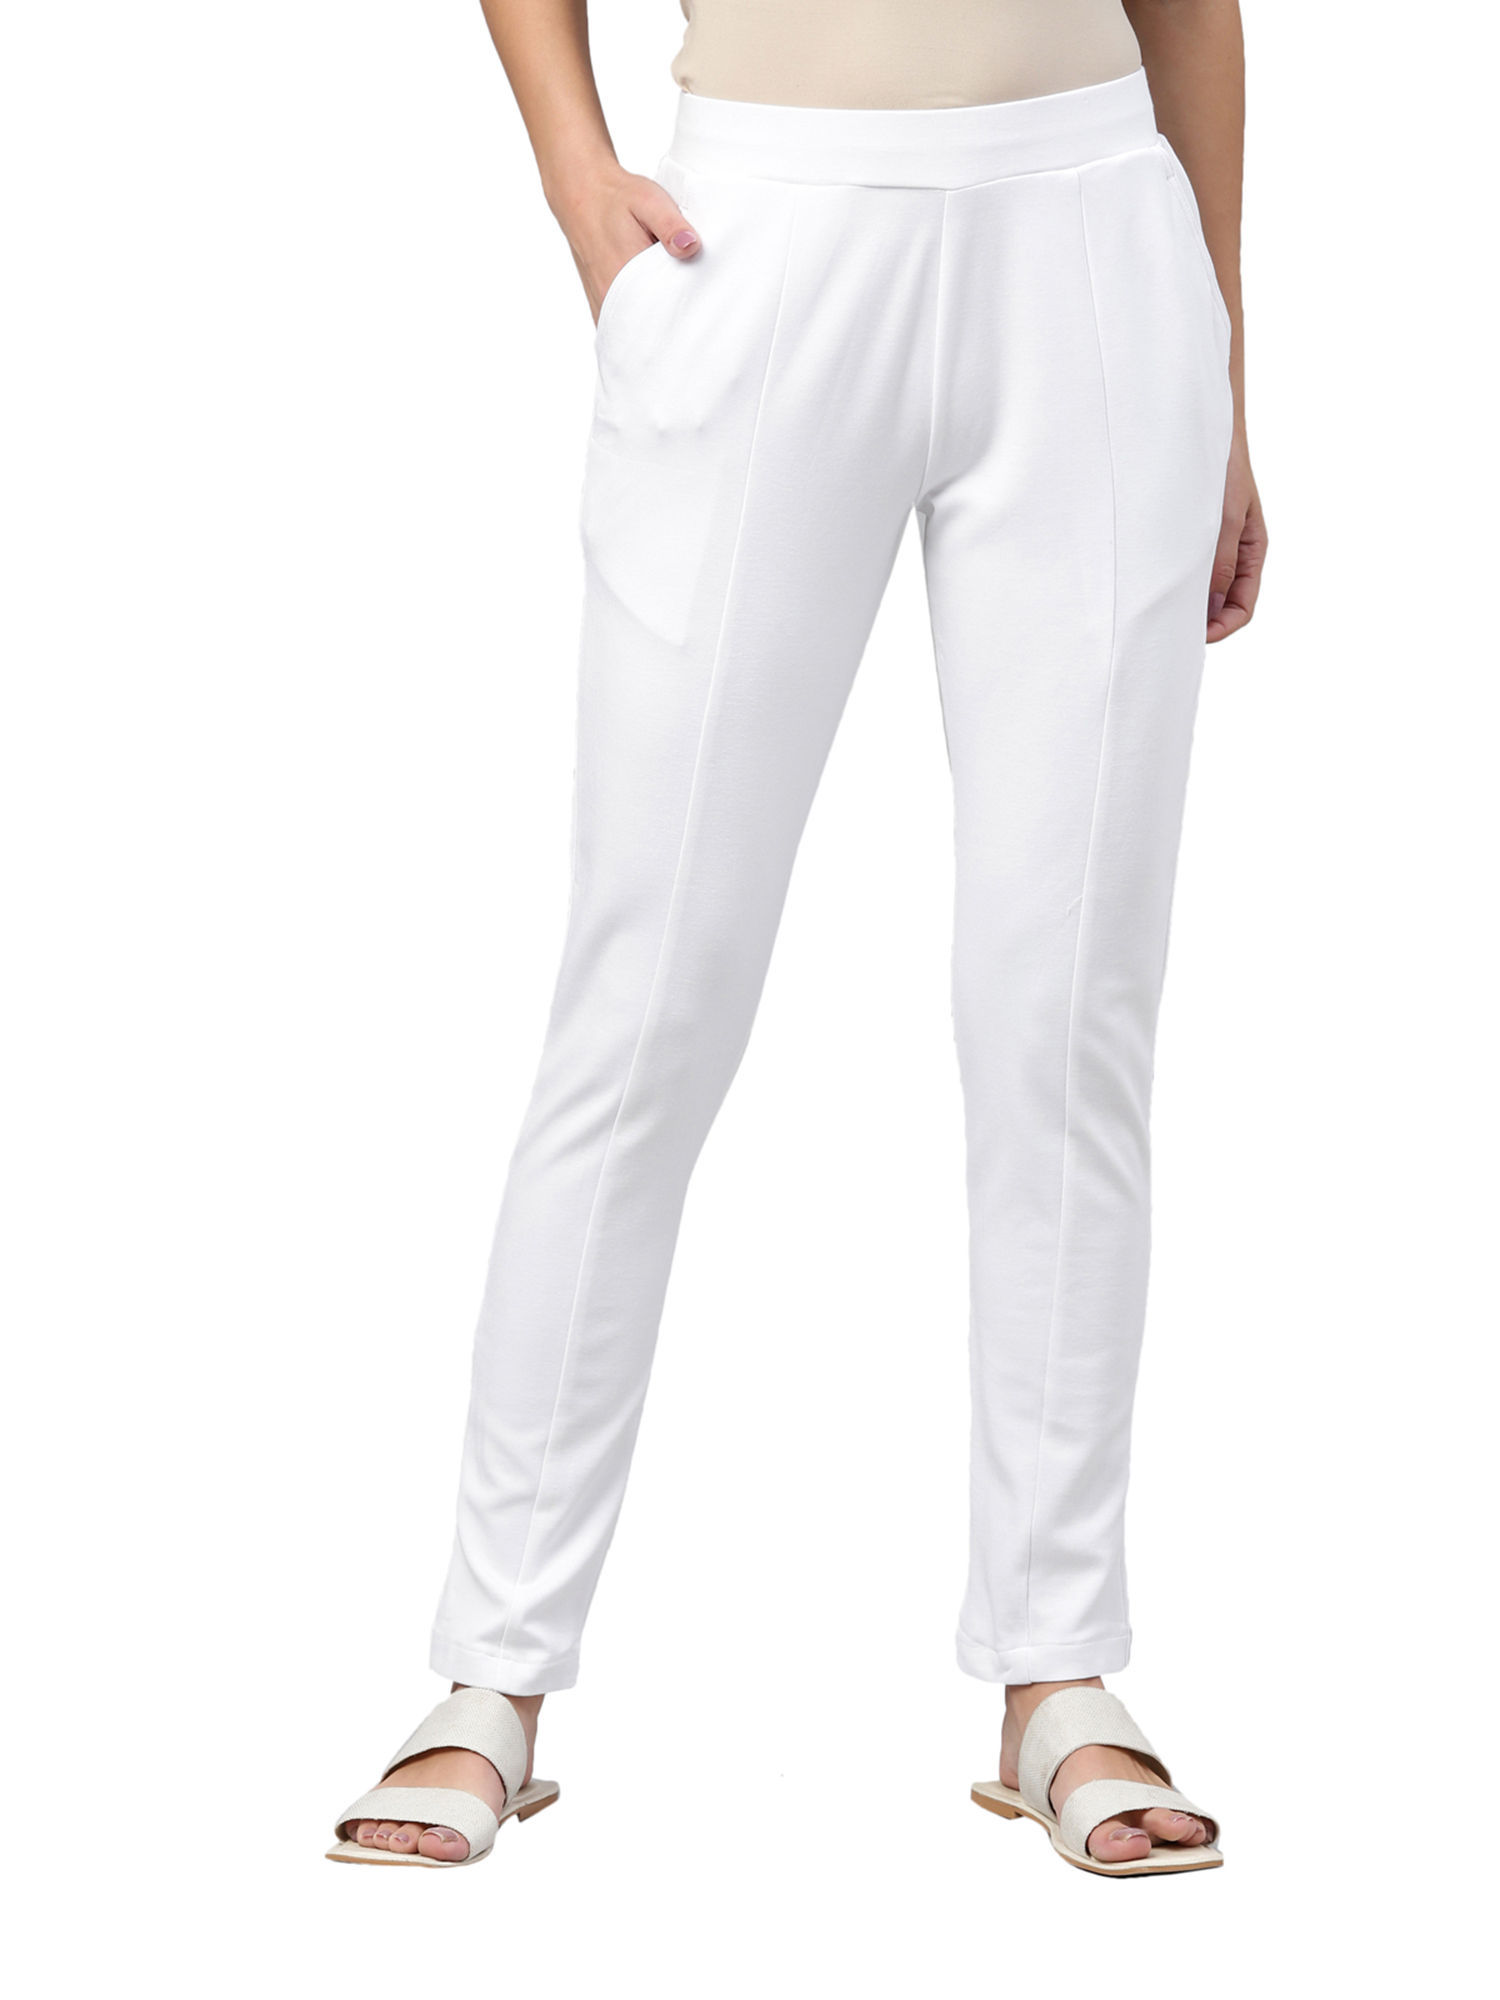 Buy Denim Deluxe Stretch Super Slim Fit White Jeans Online at Muftijeans